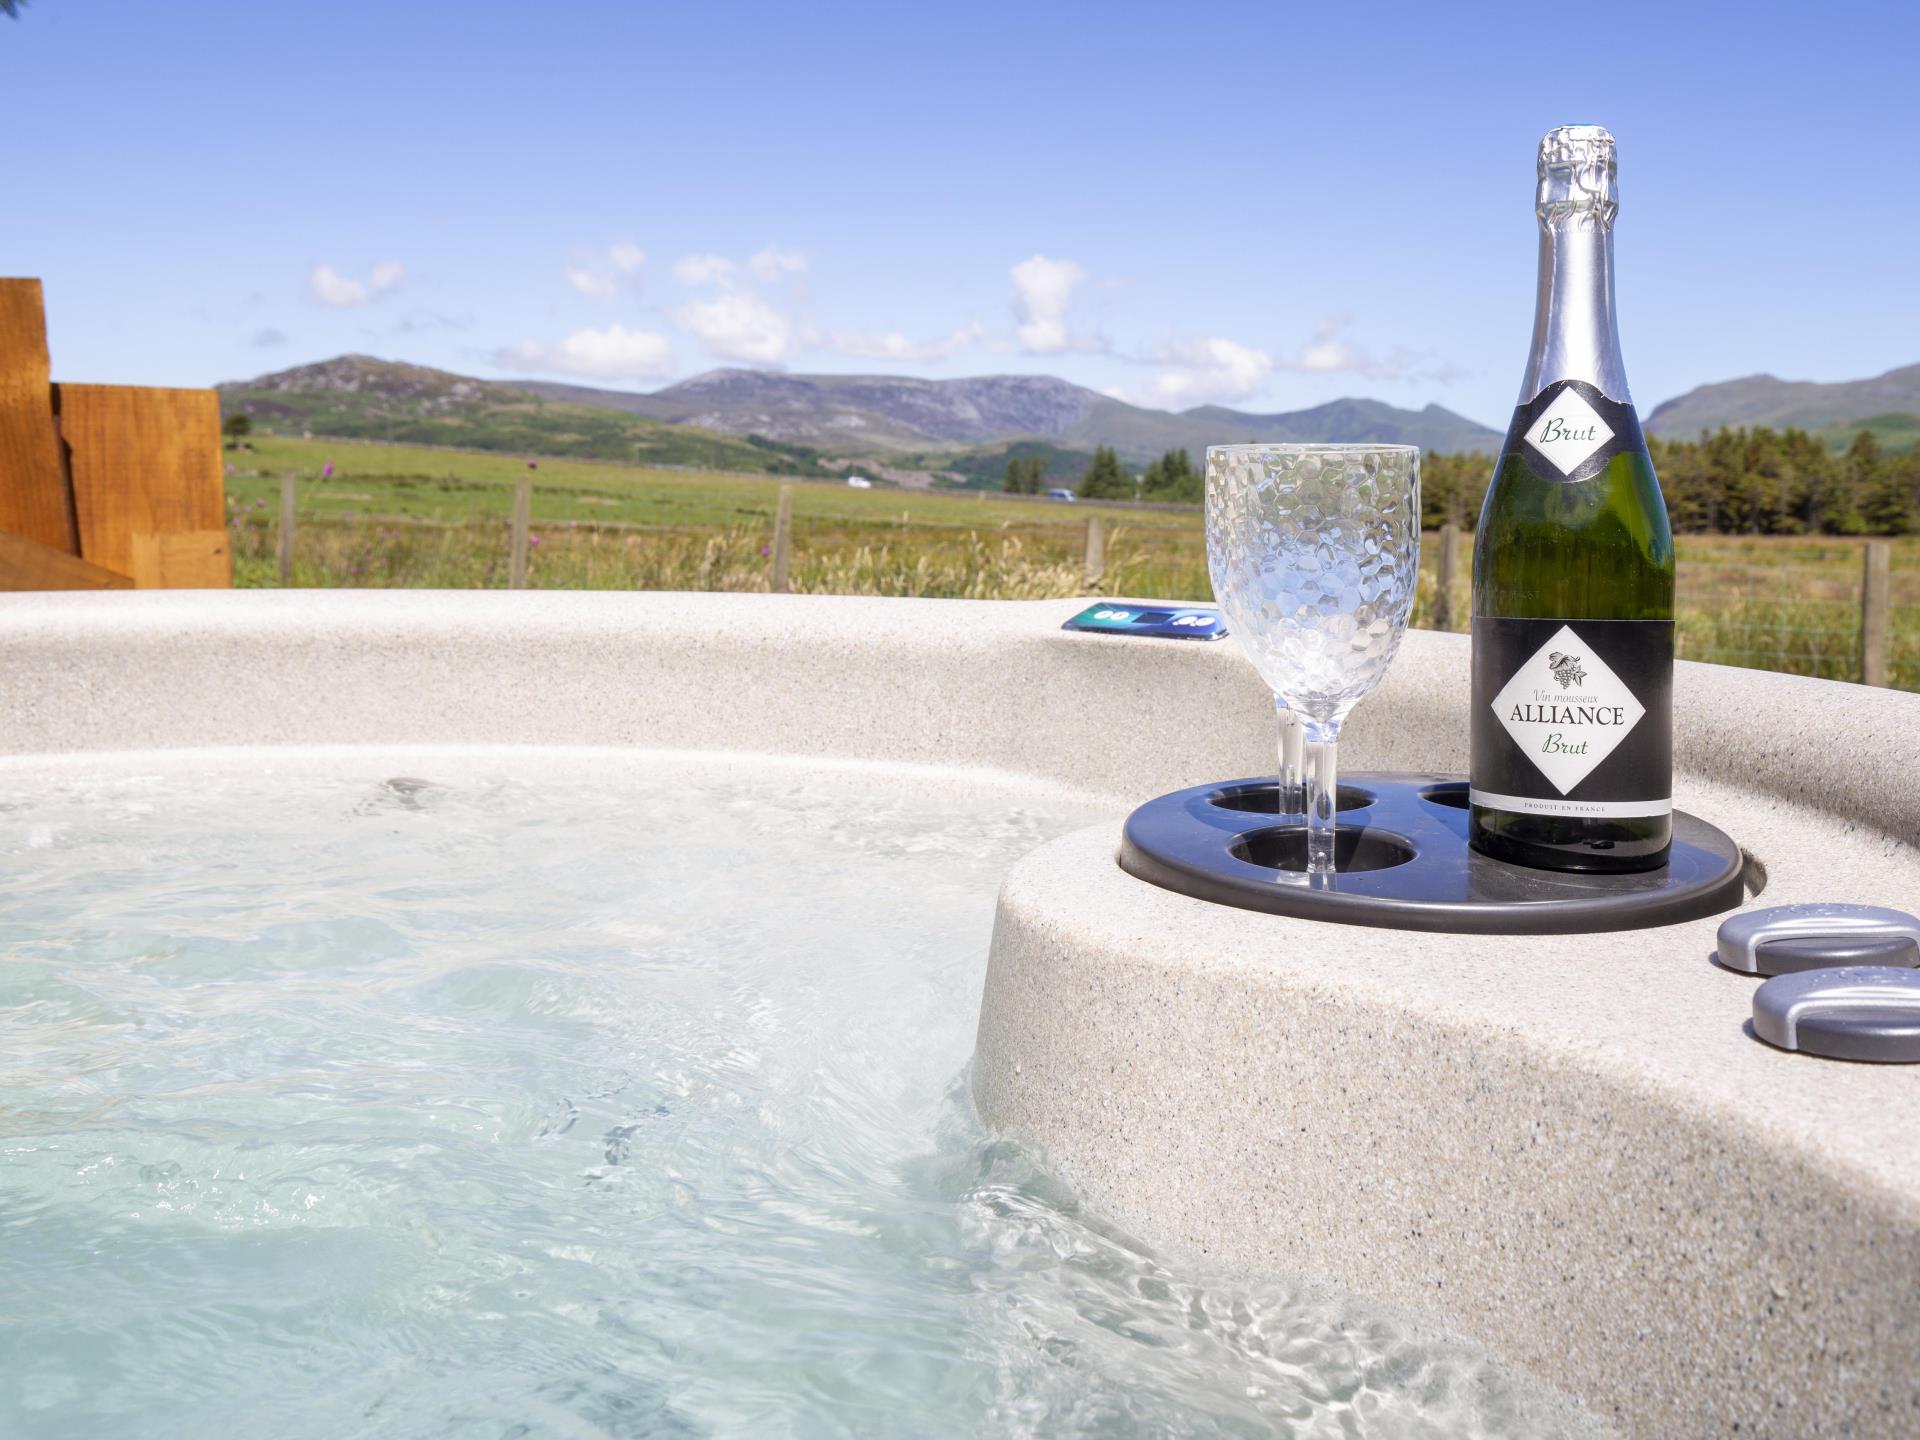 Hot Tub with a view in Snowdonia